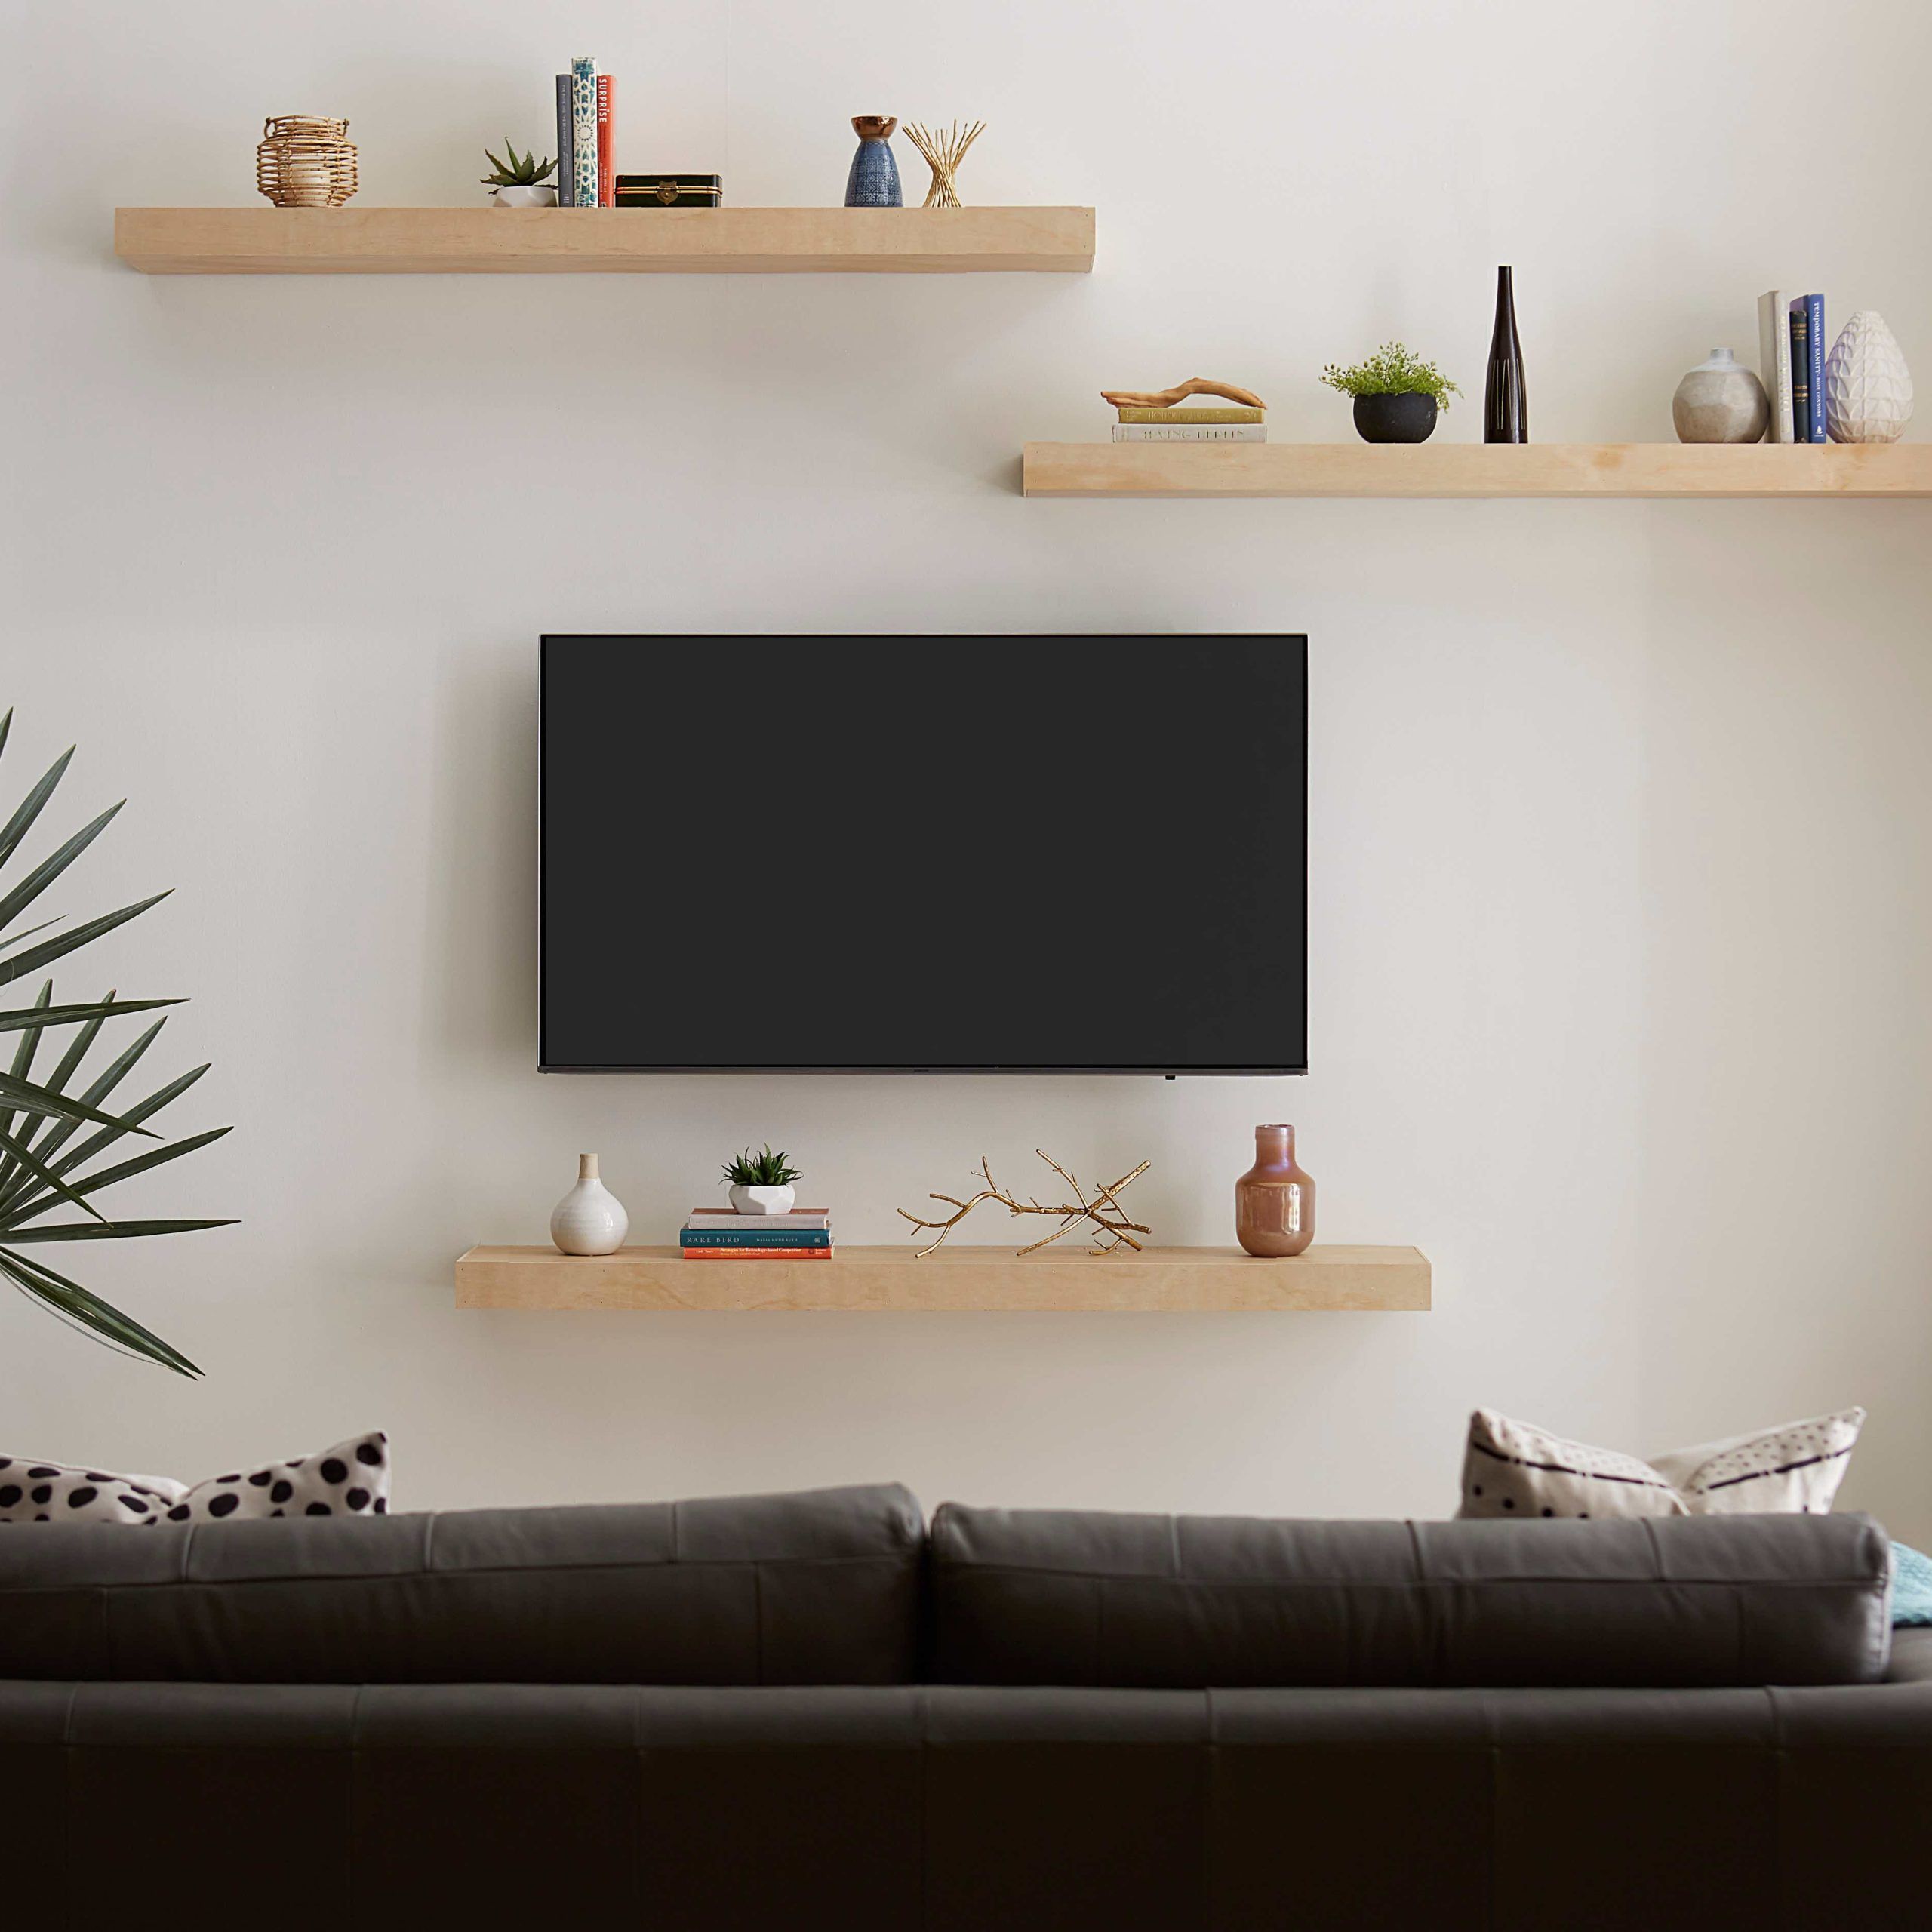 How To Decorate Around Your Tv With Floating Shelves With Regard To Floating Stands For Tvs (View 13 of 15)